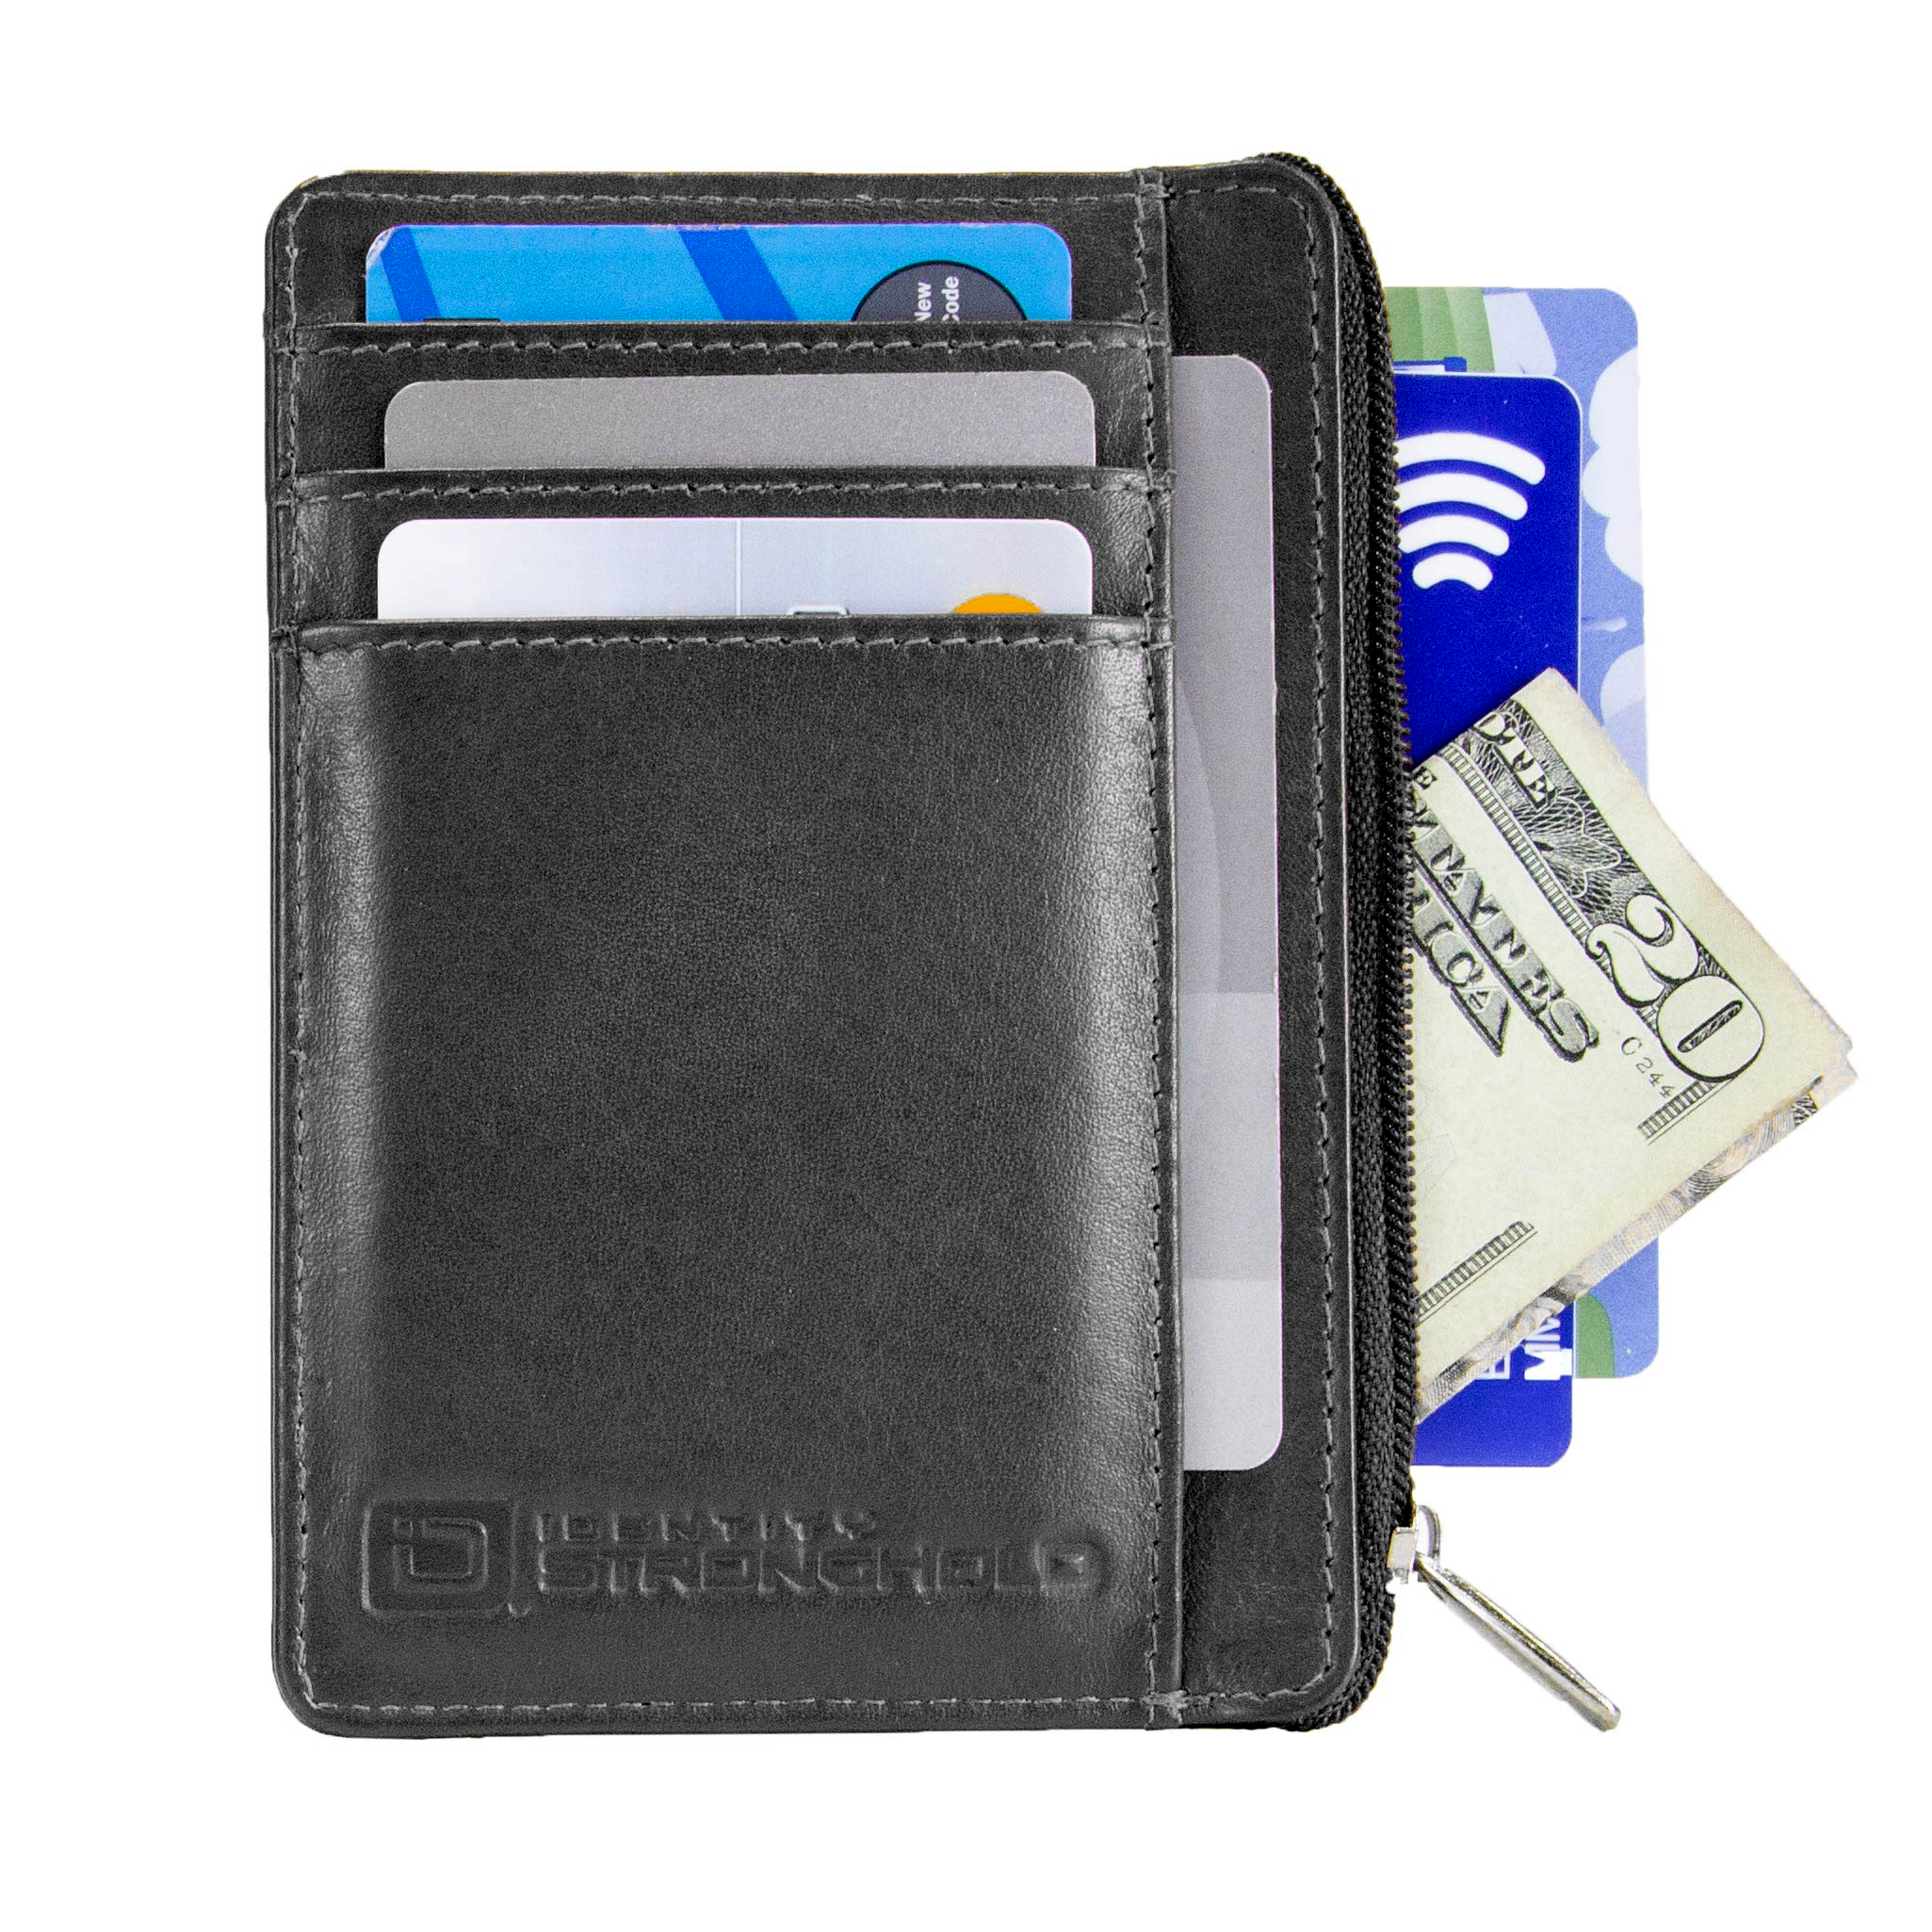 ID Stronghold RFID Wallet Mini for Men and Women - Genuine Leather - Best RFID Blocking Slim Wallet to Stop Electronic Pickpocketing - Minimalist Wallet - Black - image 1 of 6